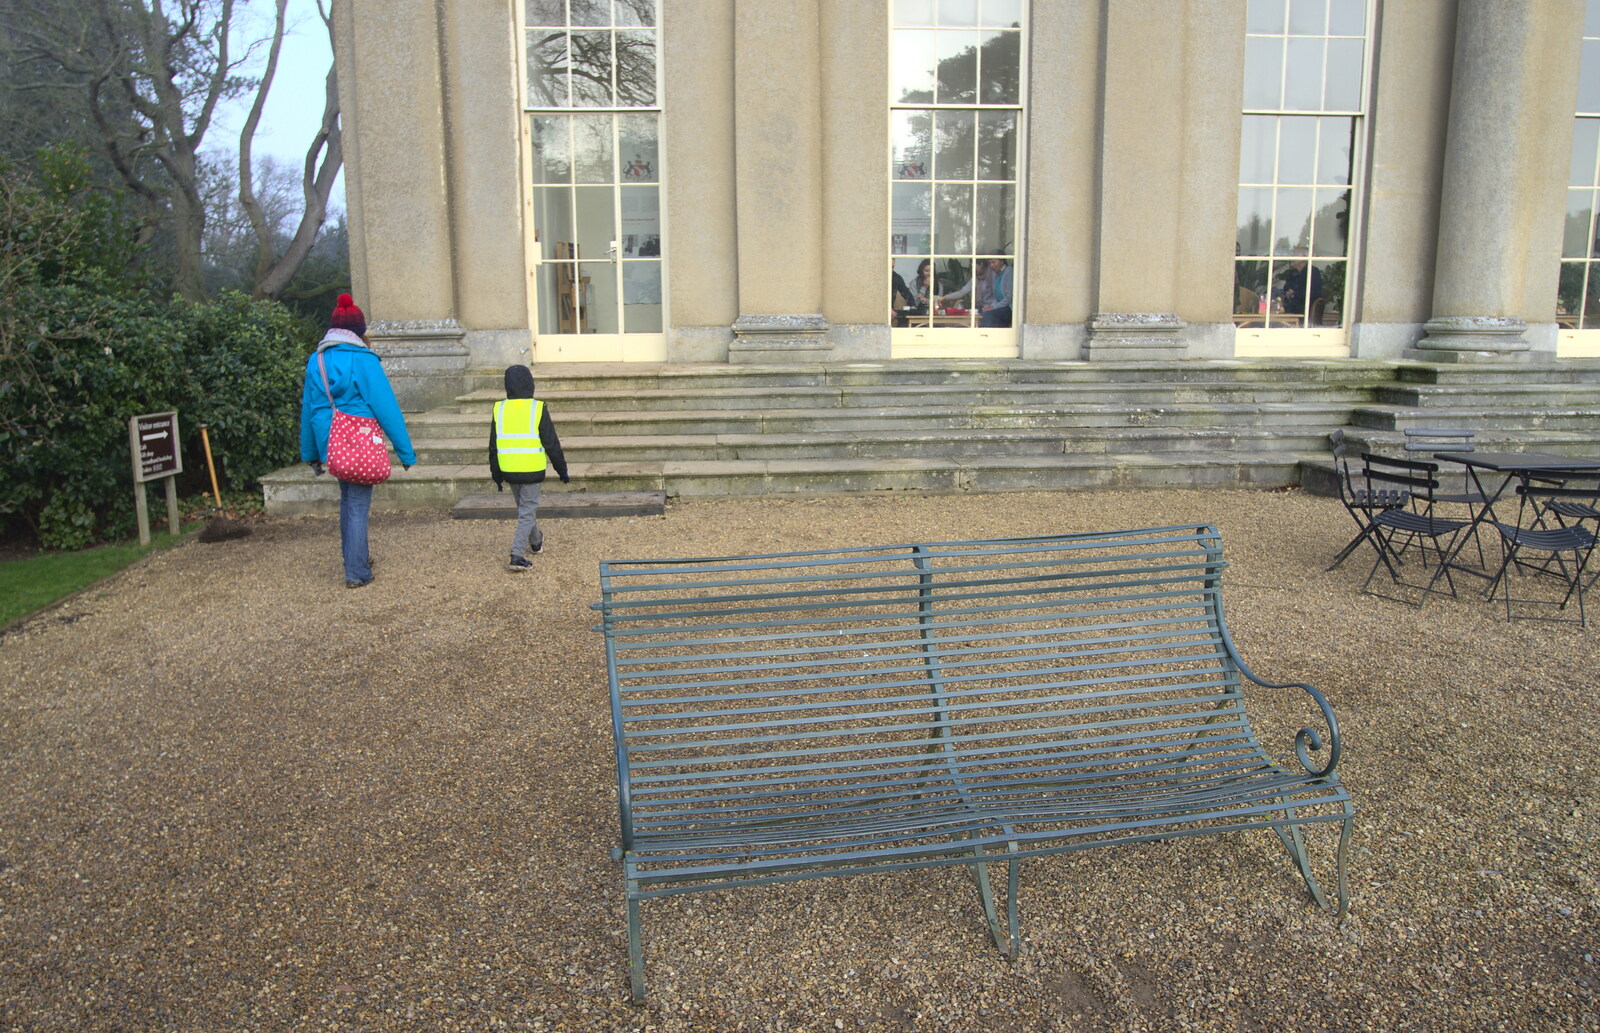 Isobel and Fred near the orangery from A Trip to Ickworth House, Horringer, Suffolk - 30th December 2016